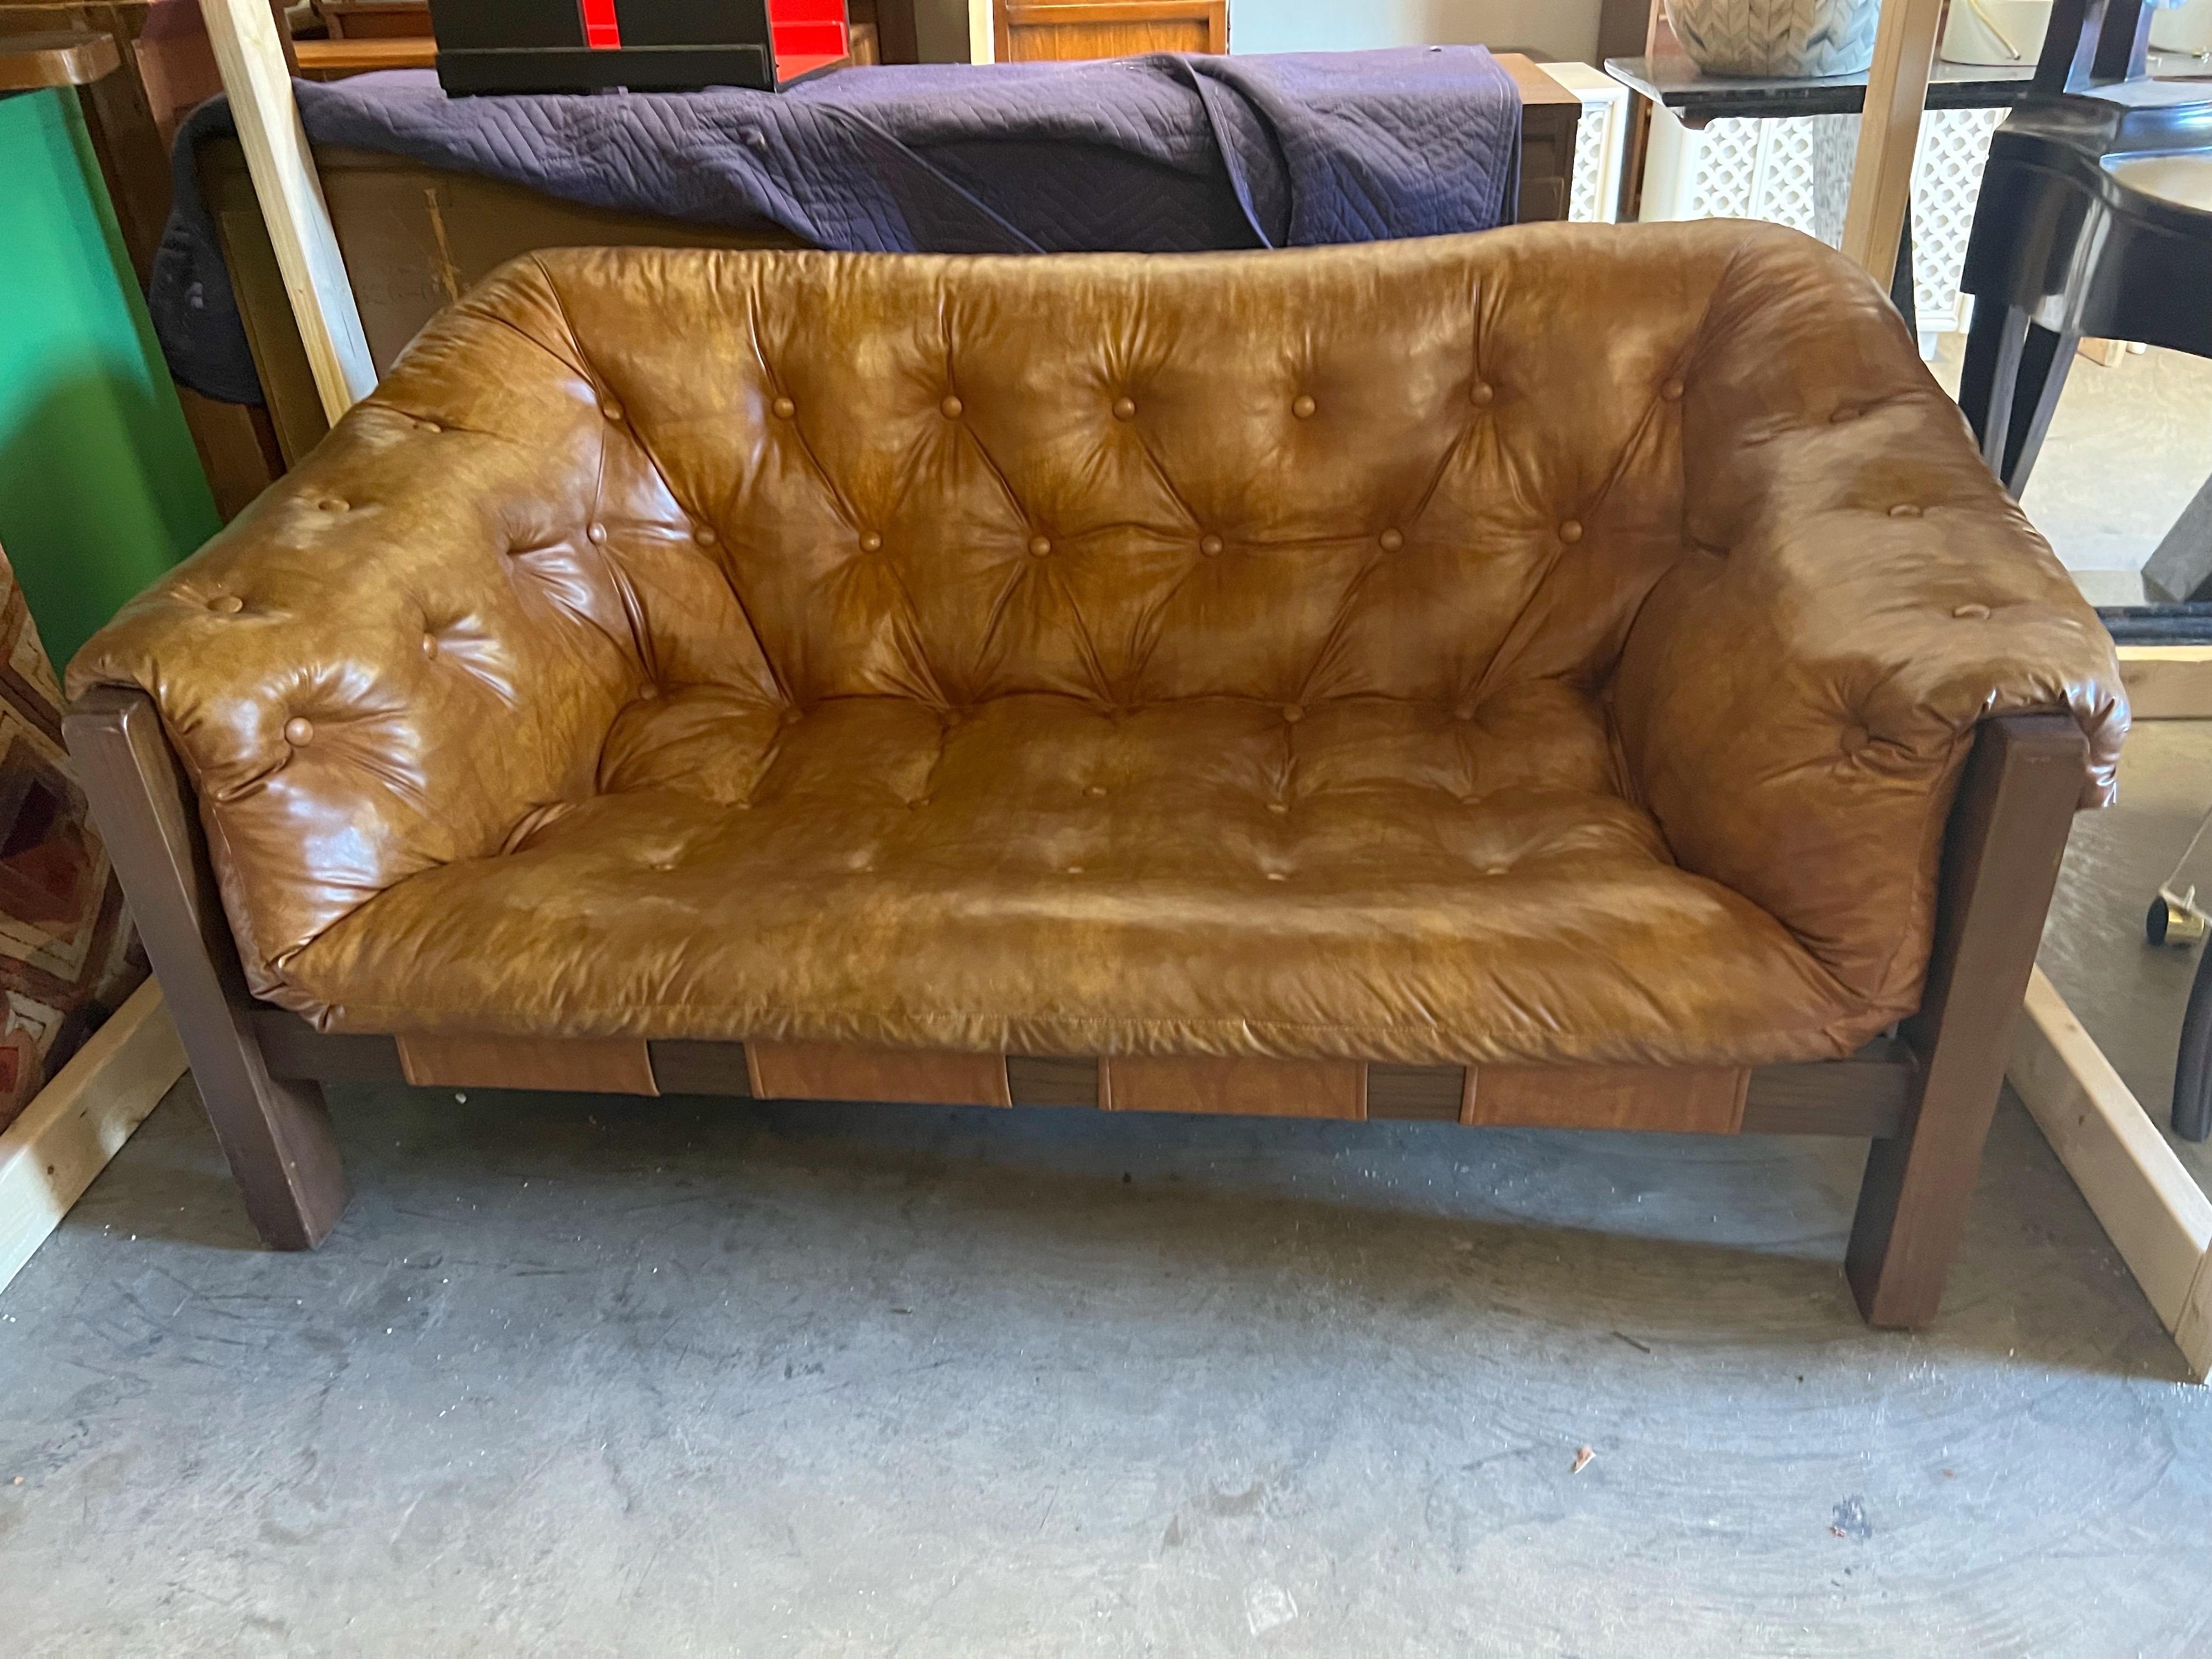 In a good vintage condition without any tear or damage. This beautiful piece features a walnut frame with tufted sling cushions. Both incredibly stylish as well as comfortable. Clean lines make this a wonderful addition to any modern living or